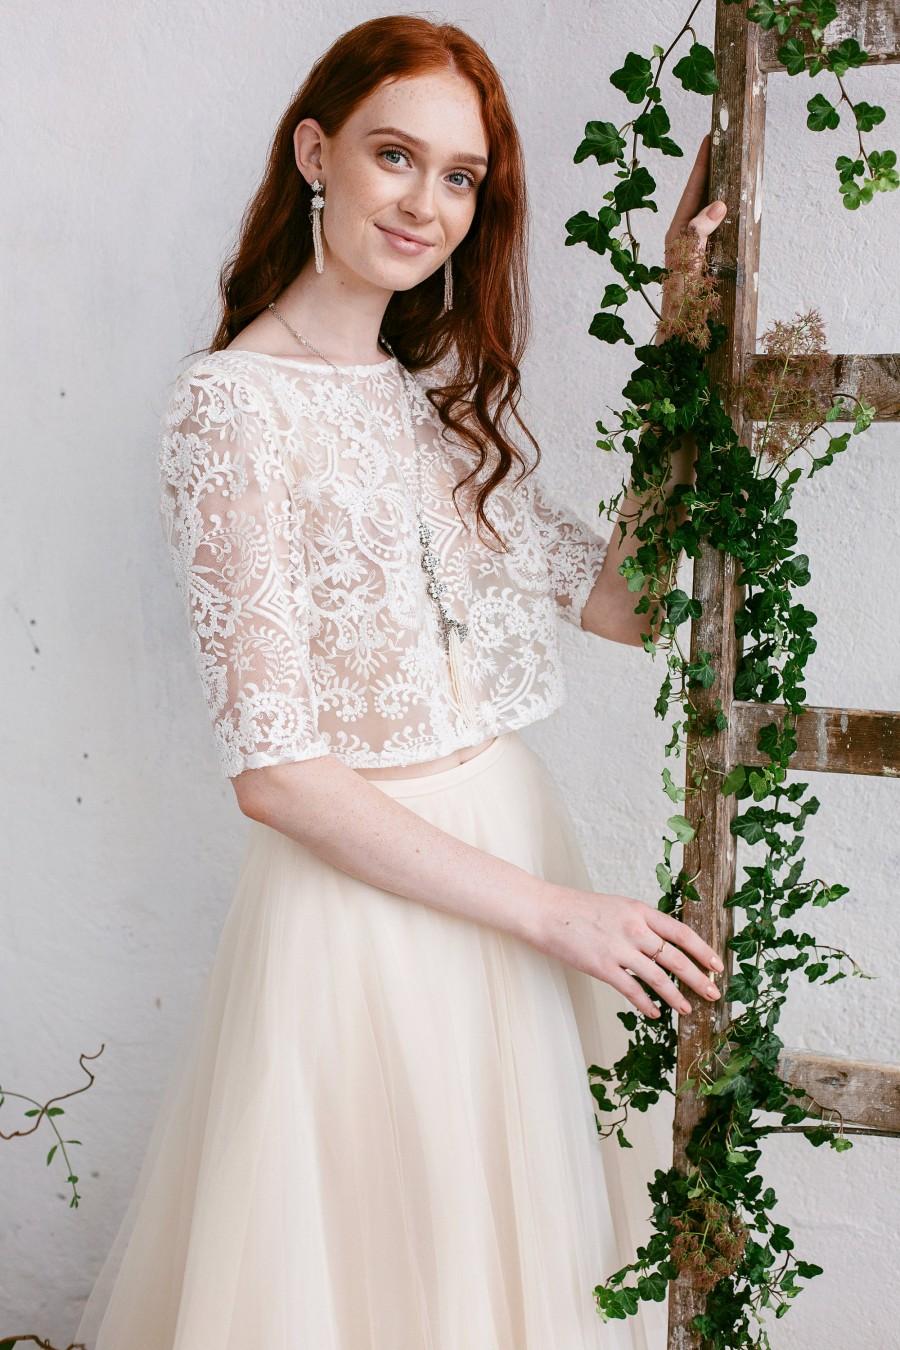 Hochzeit - Wedding Top Lace, Wedding Separates  Top,  Ivory Off White  Lace Top, Wedding Blouse, Bridal Separates, Wedding Crop Top  -ASTRID